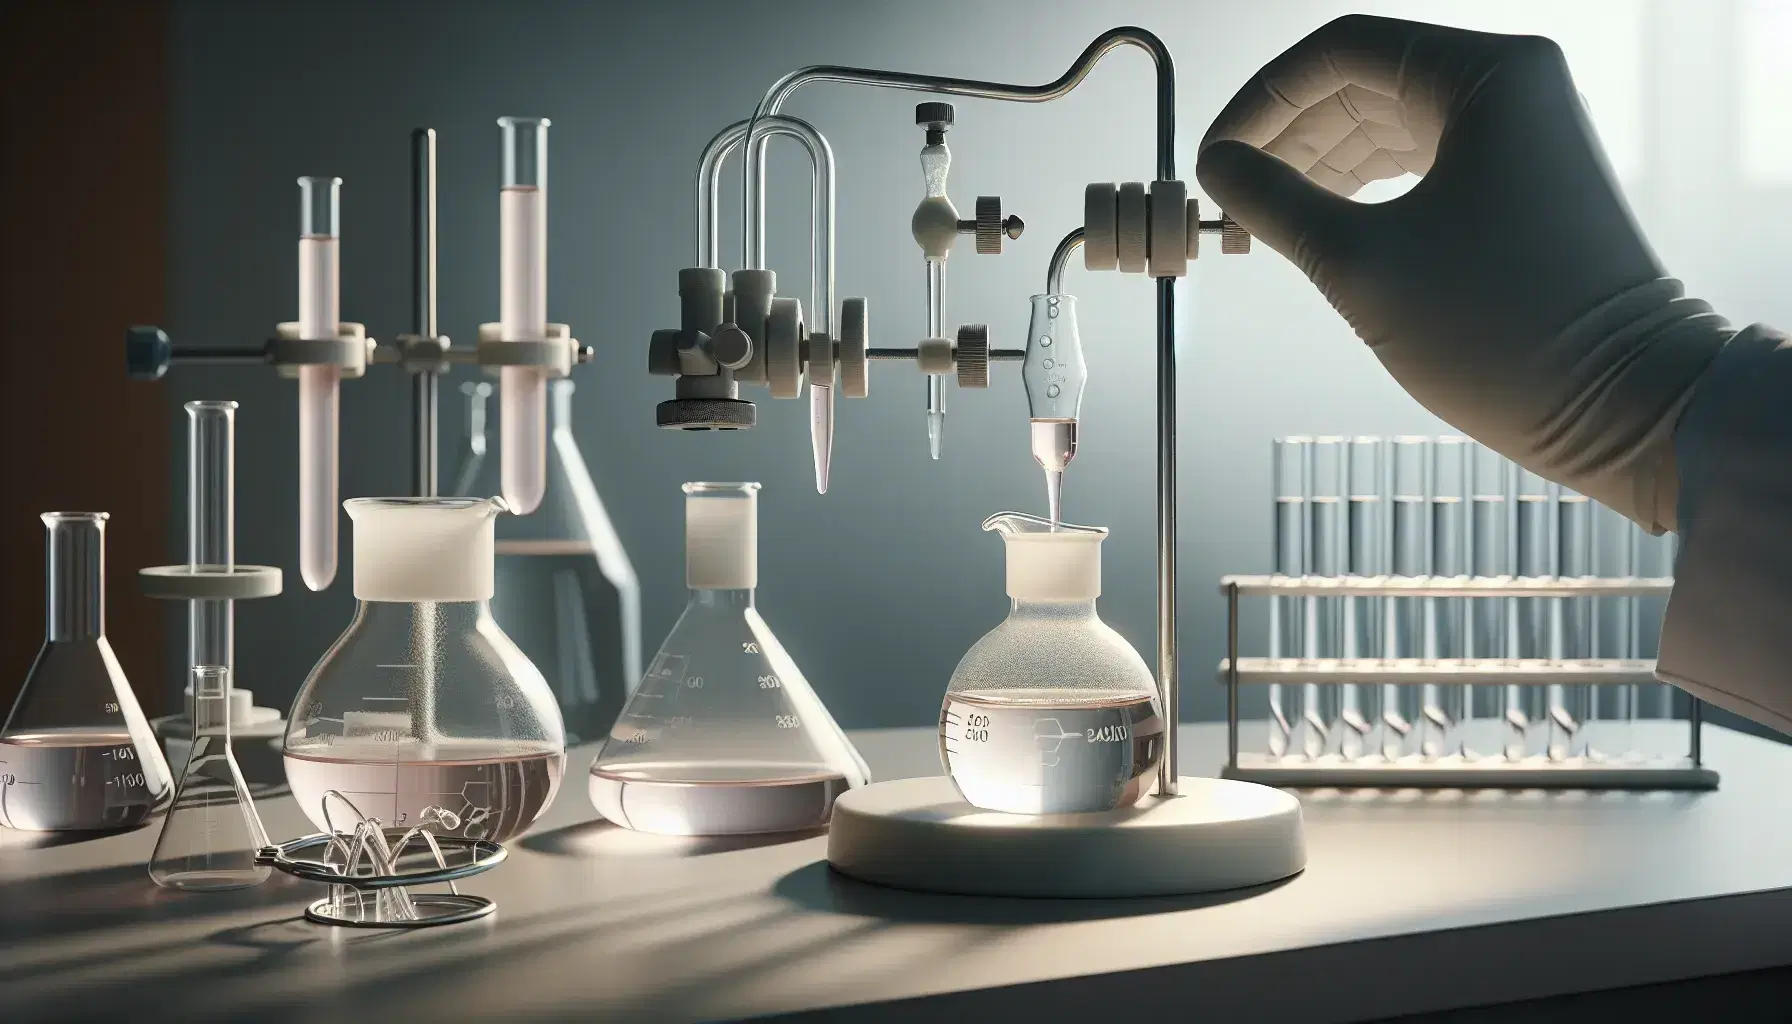 Laboratory with glass burette containing pink solution and porcelain flask underneath, gloved hands adjust flow for titration.